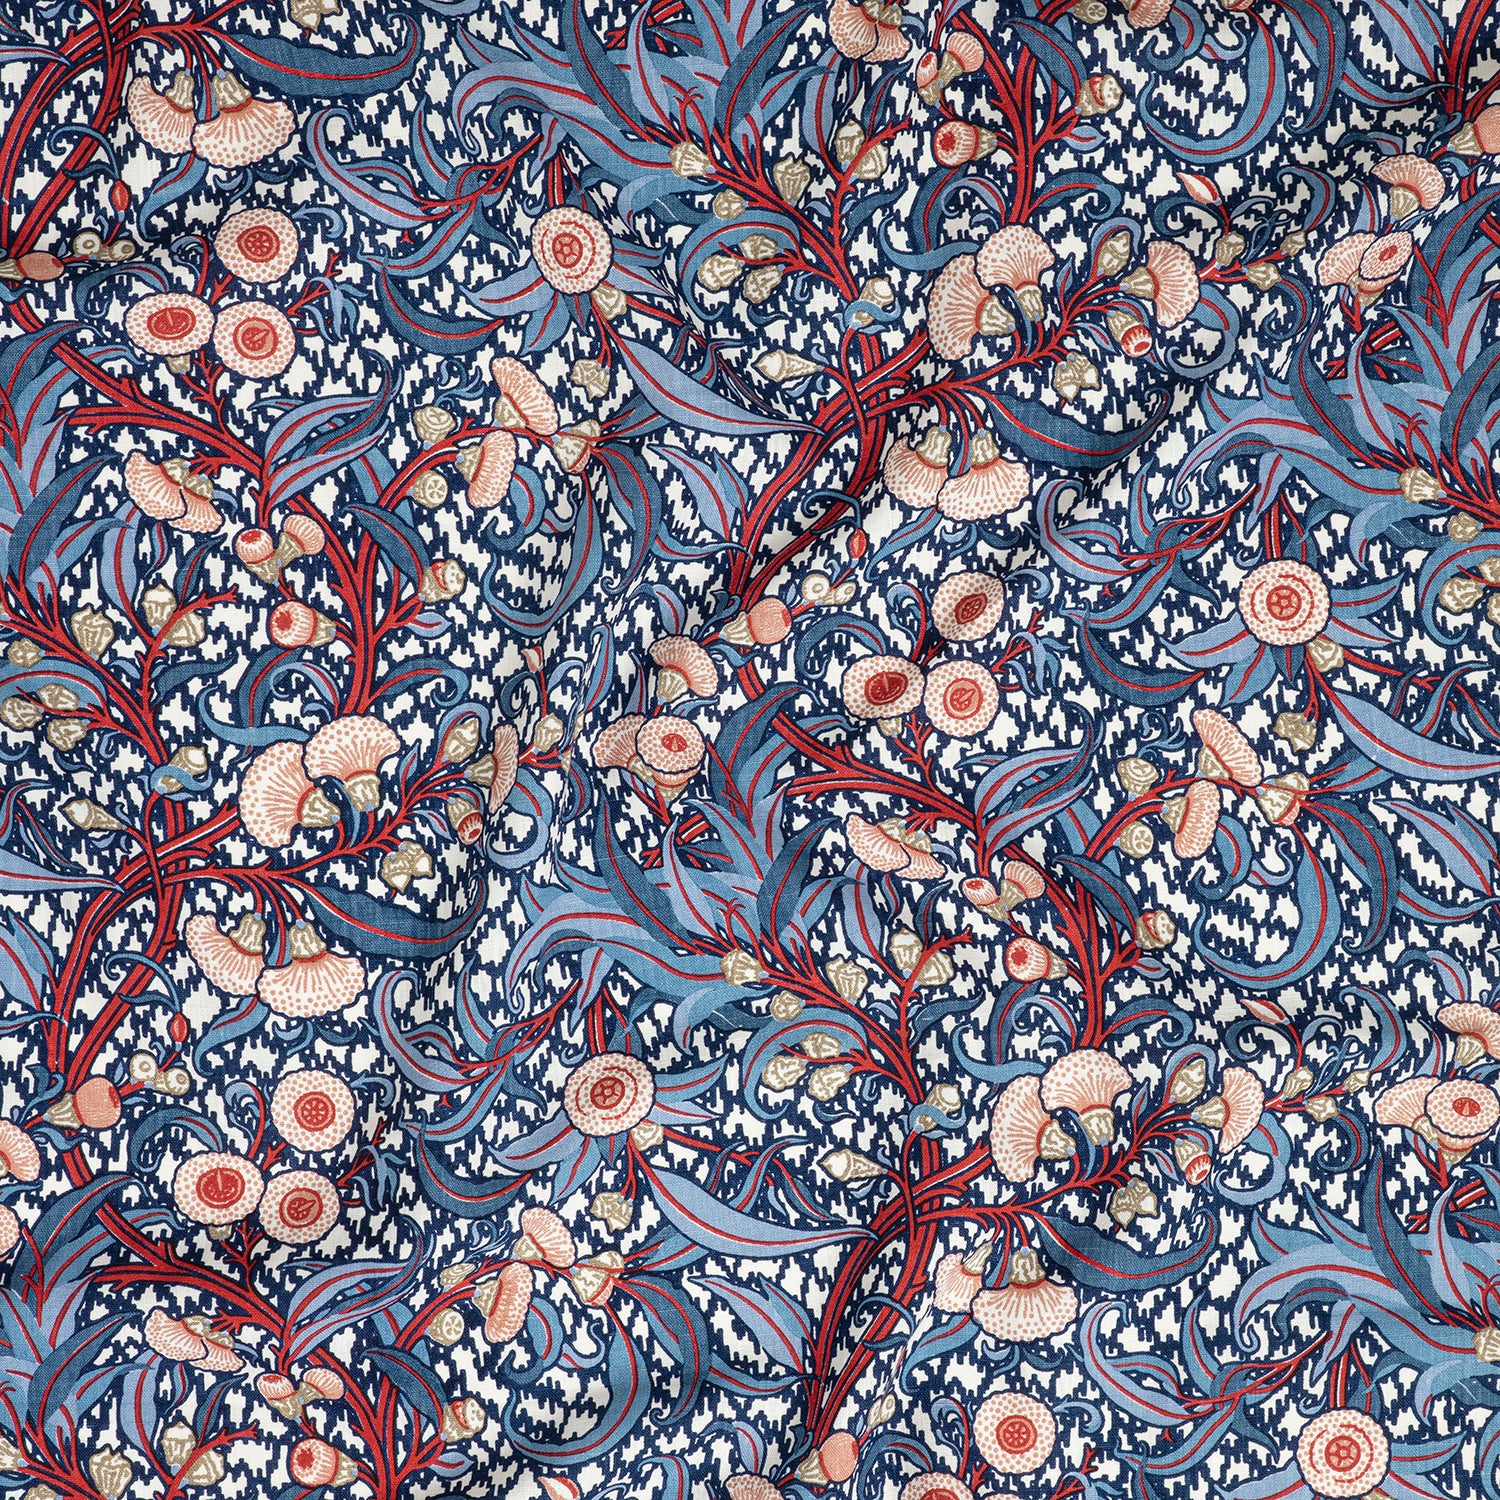 Draped fabric in a dense floral print in blue, red and orange on a cream field.